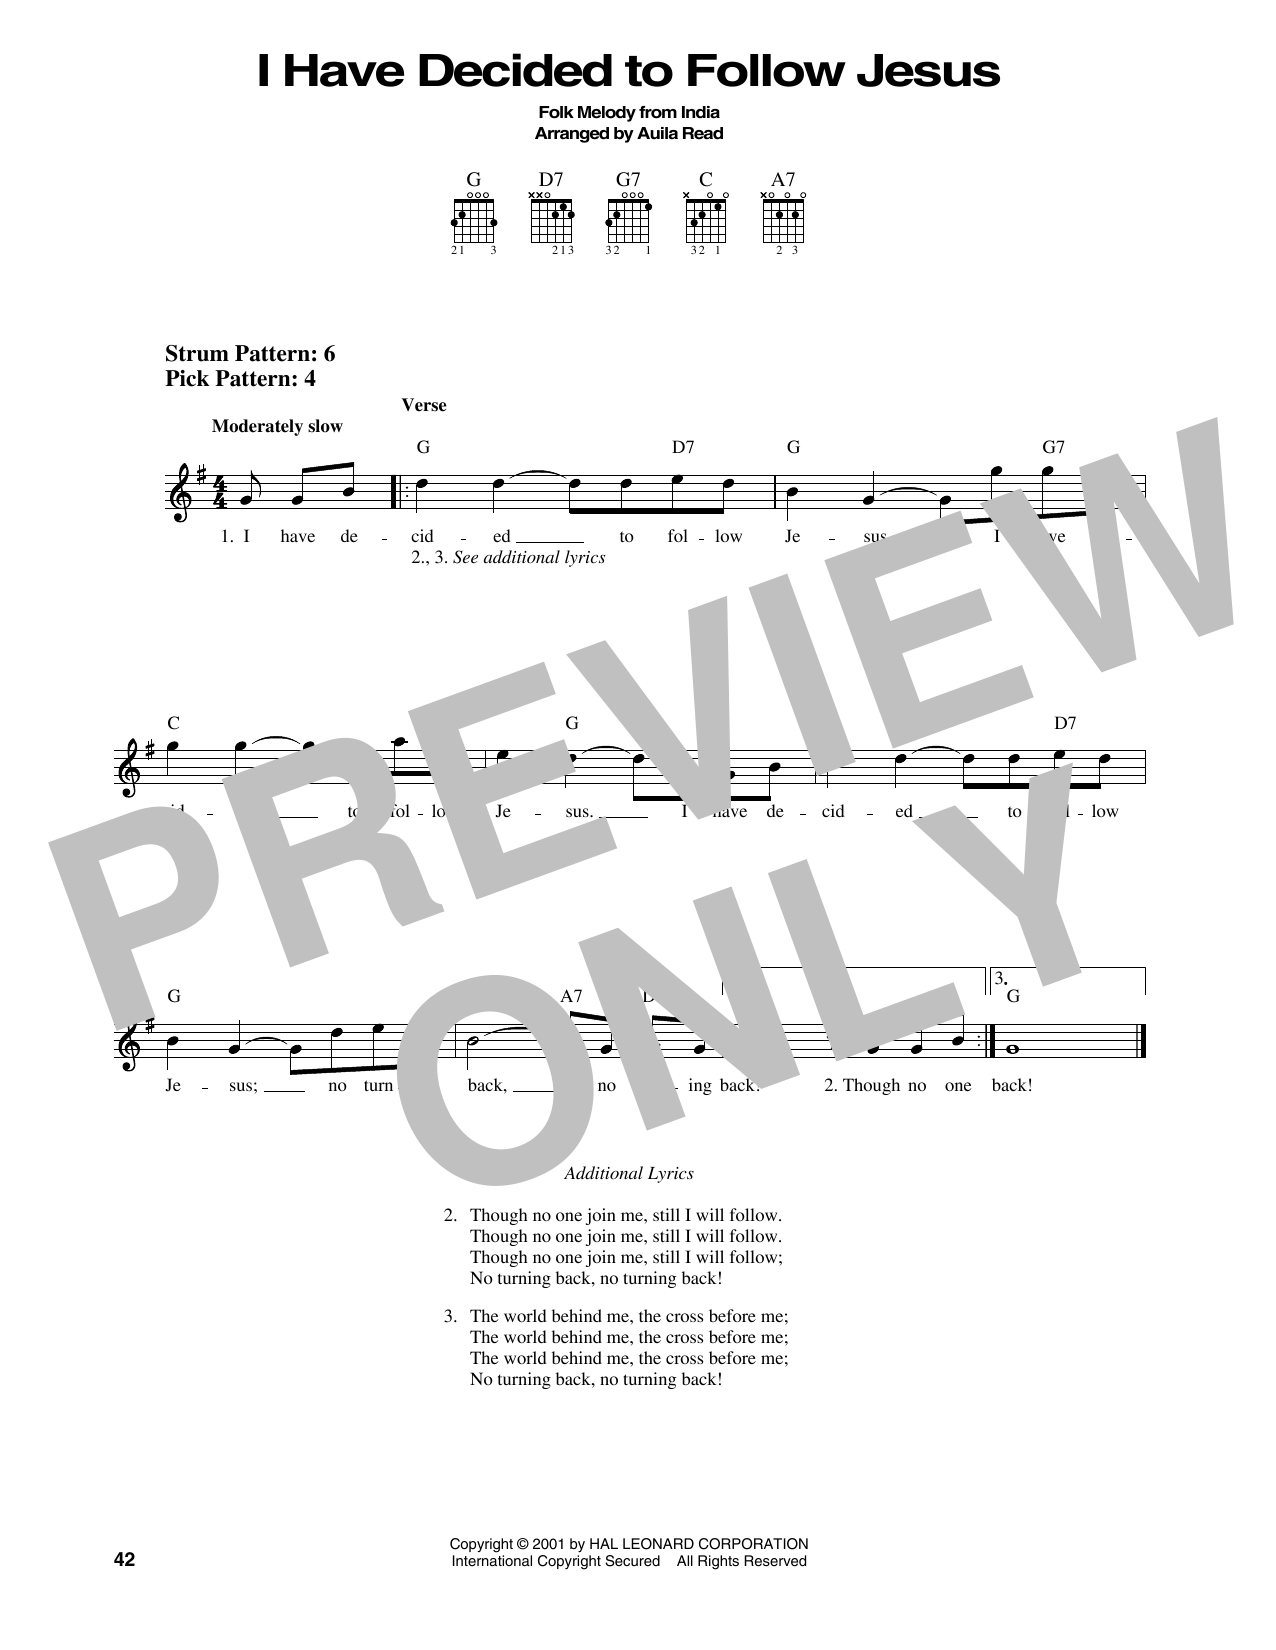 Auila Read I Have Decided To Follow Jesus sheet music notes printable PDF score